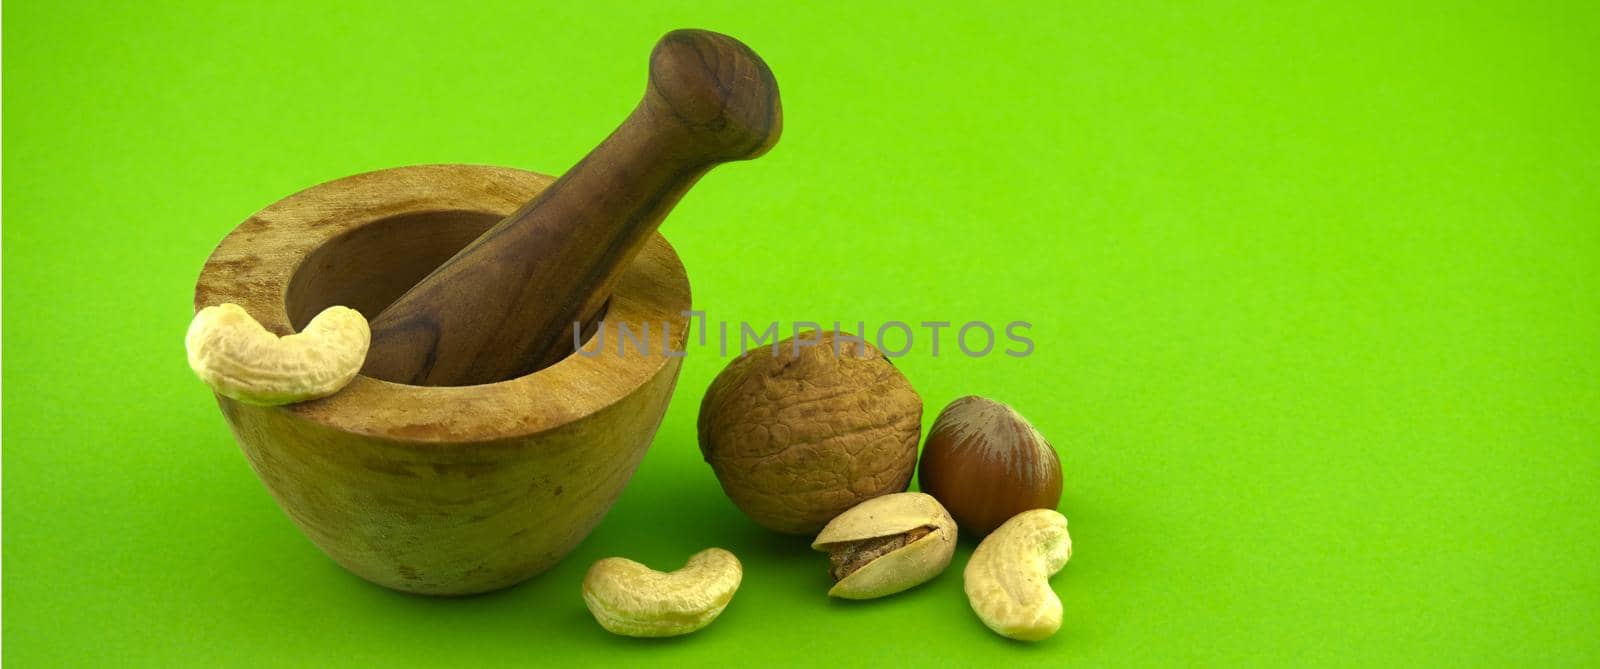 Mortar and pestle and various nuts over green background by NetPix